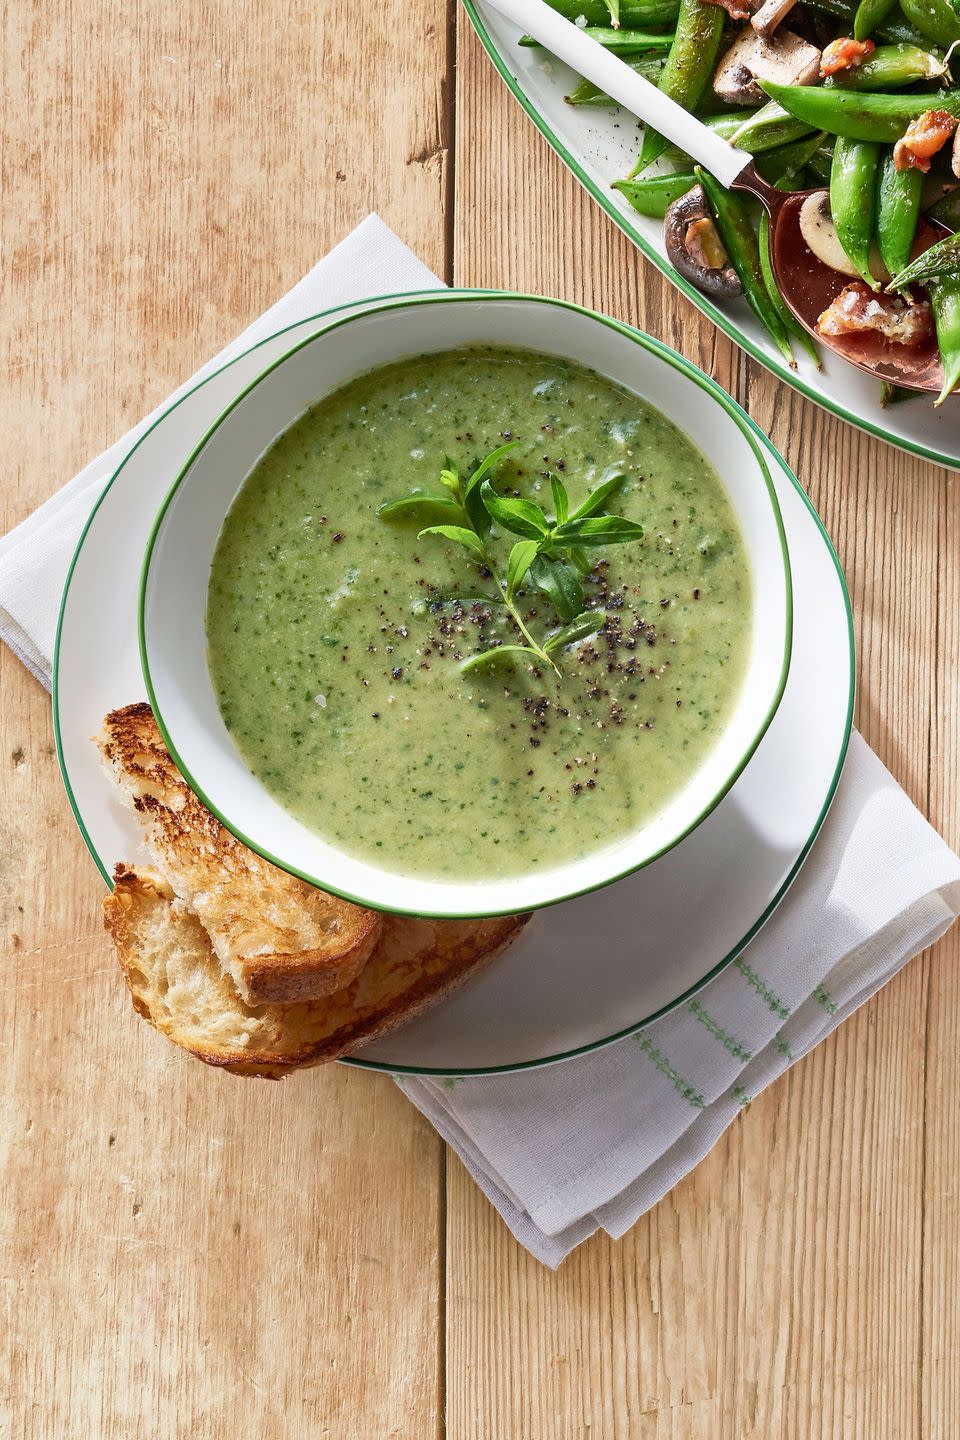 snap pea and lettuce soup in a white bowl with green trim and served with toasted bread